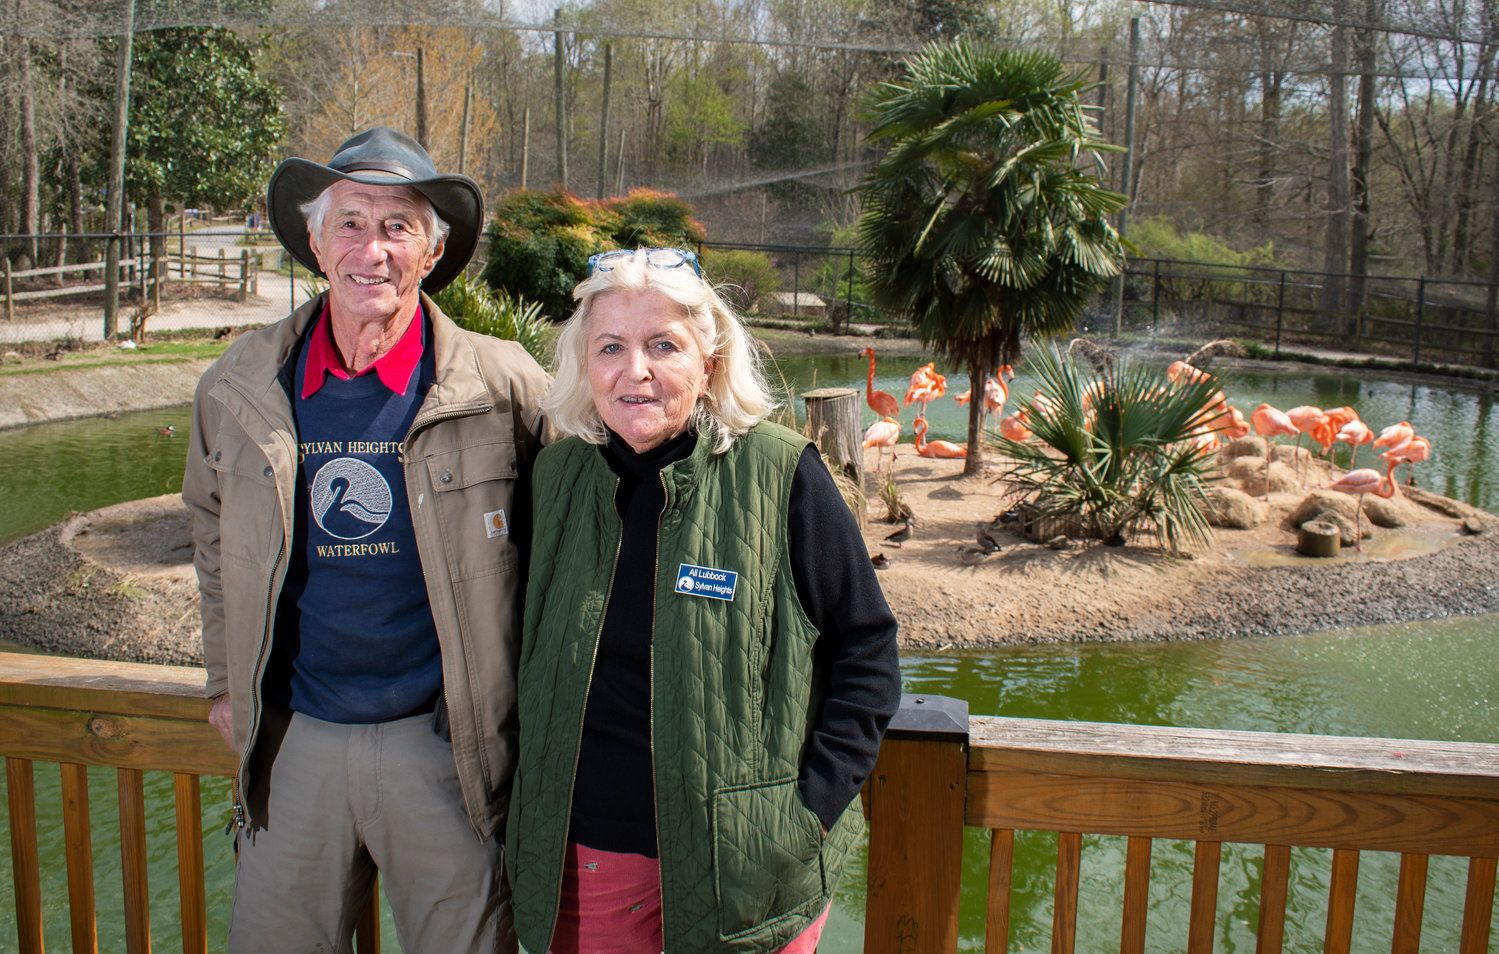 Mike and Ali Lubbock founded Sylvan Heights Bird Park to educate the public.